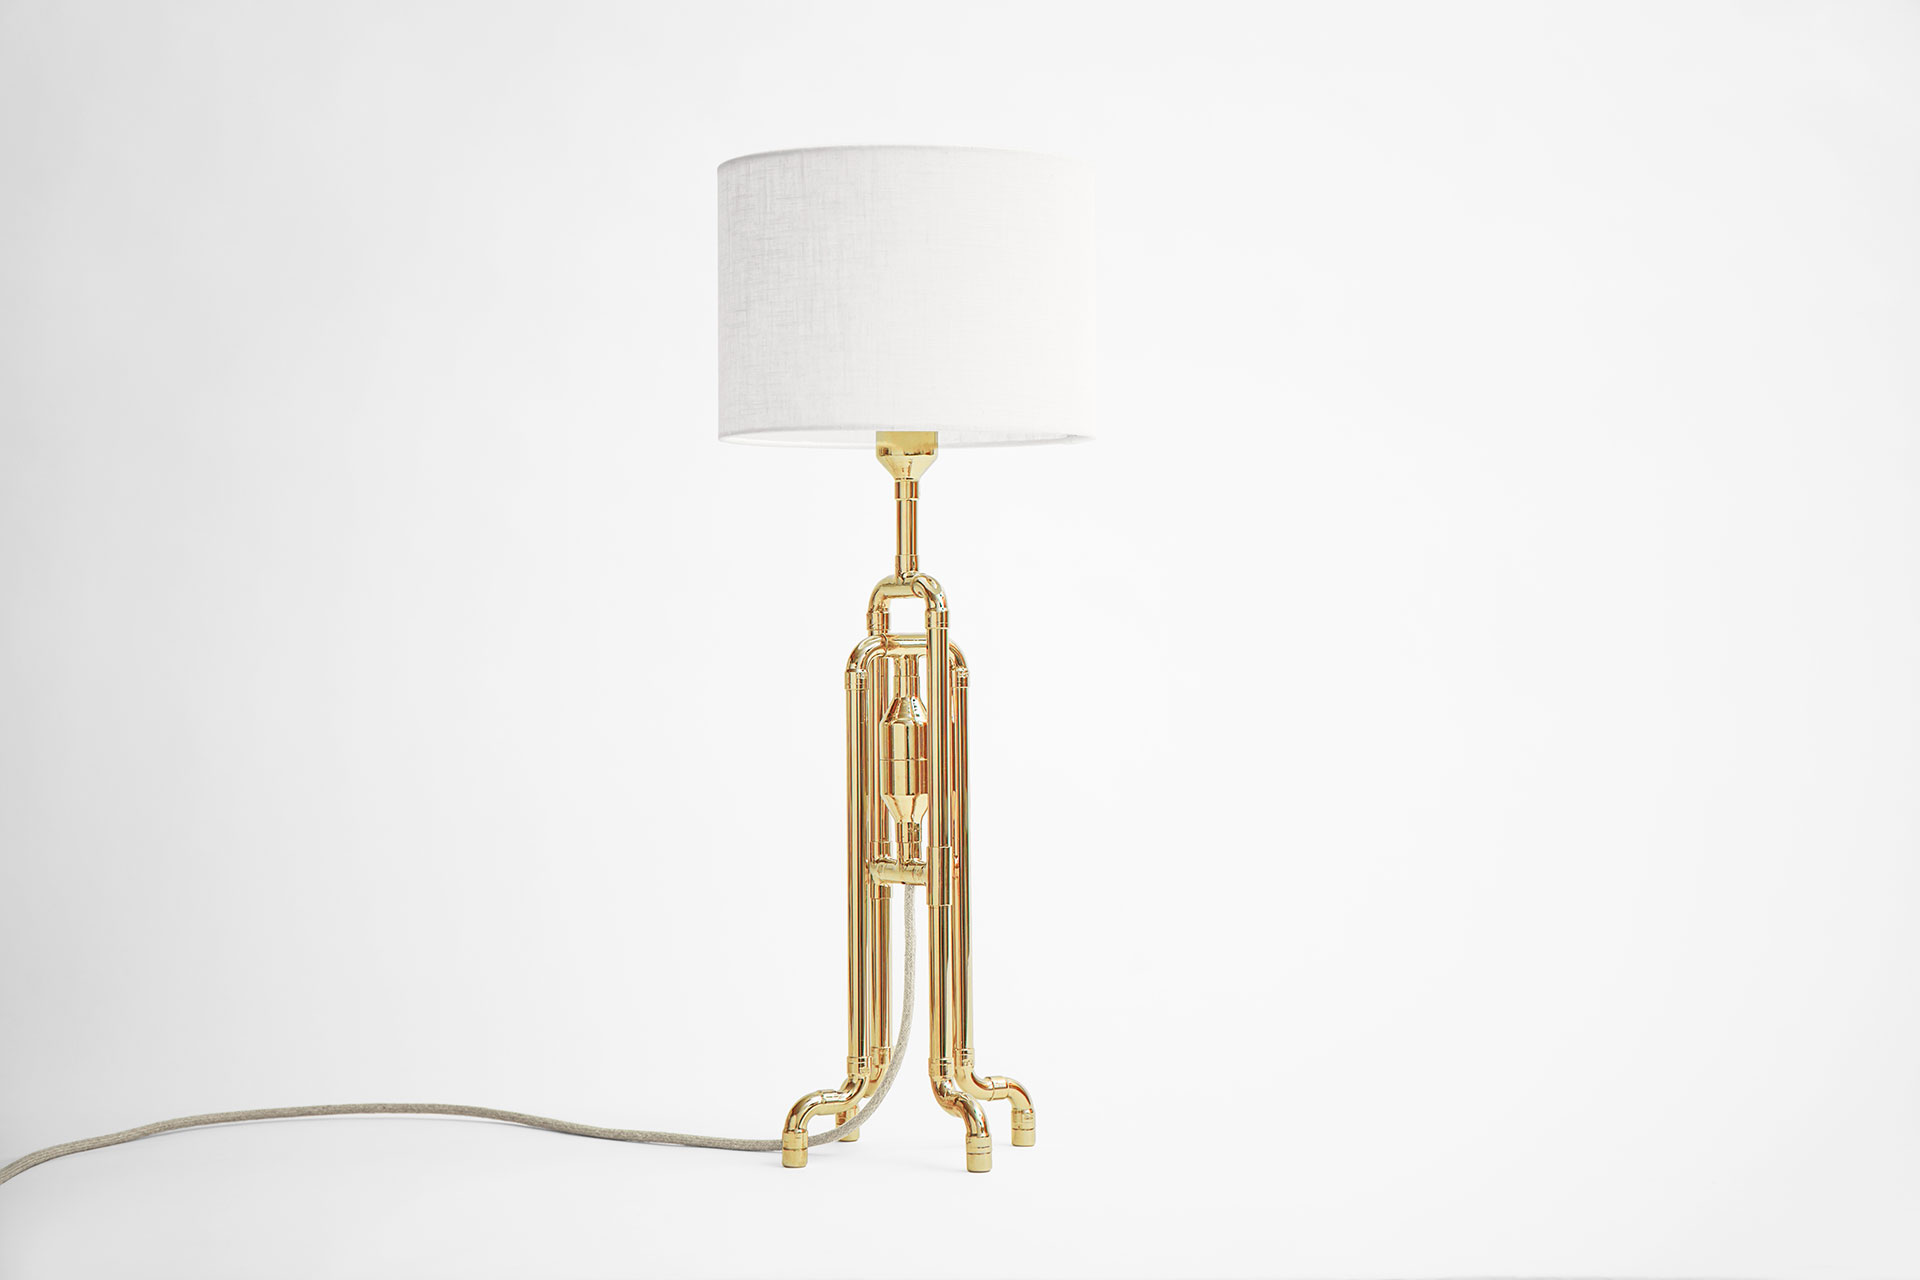 Designer table lamp in gold brass metal finish with white natural linen shade inspired by jellyfish shape